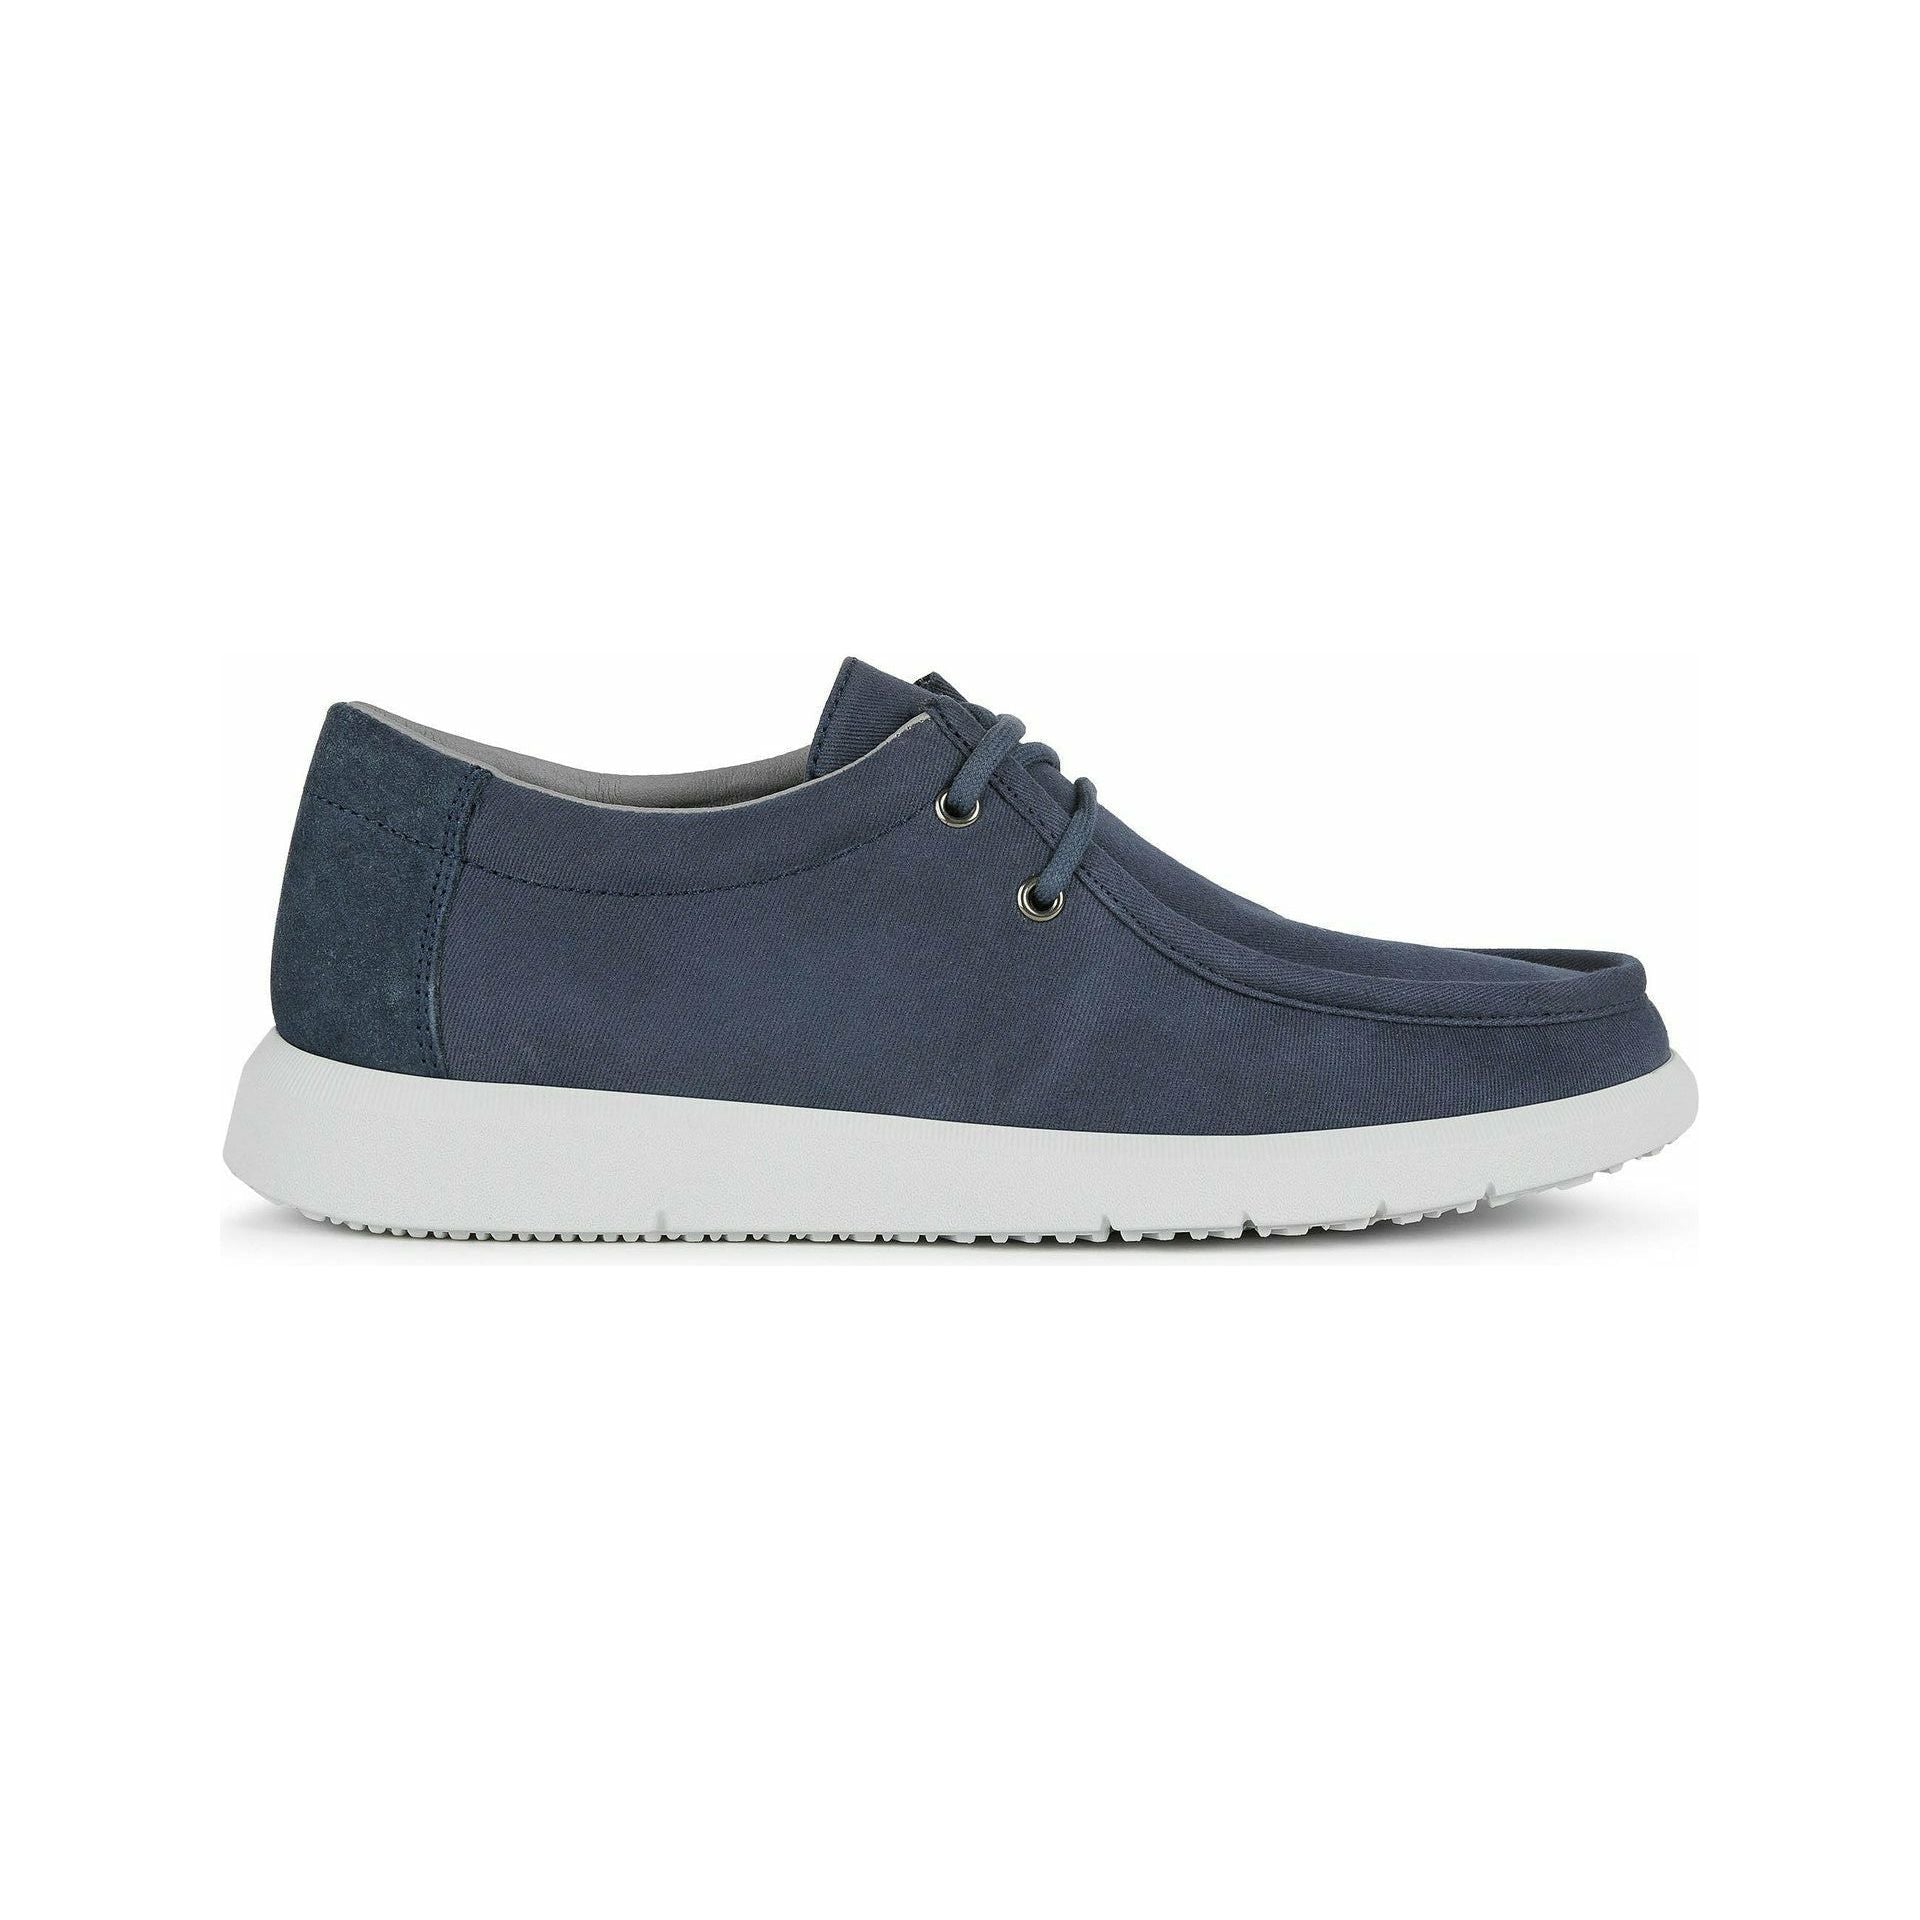 Geox Errico - Men's Canvas Lace Shoe in Navy | Geox Shoes | Wisemans | Bantry | West Cork | Munster | Ireland